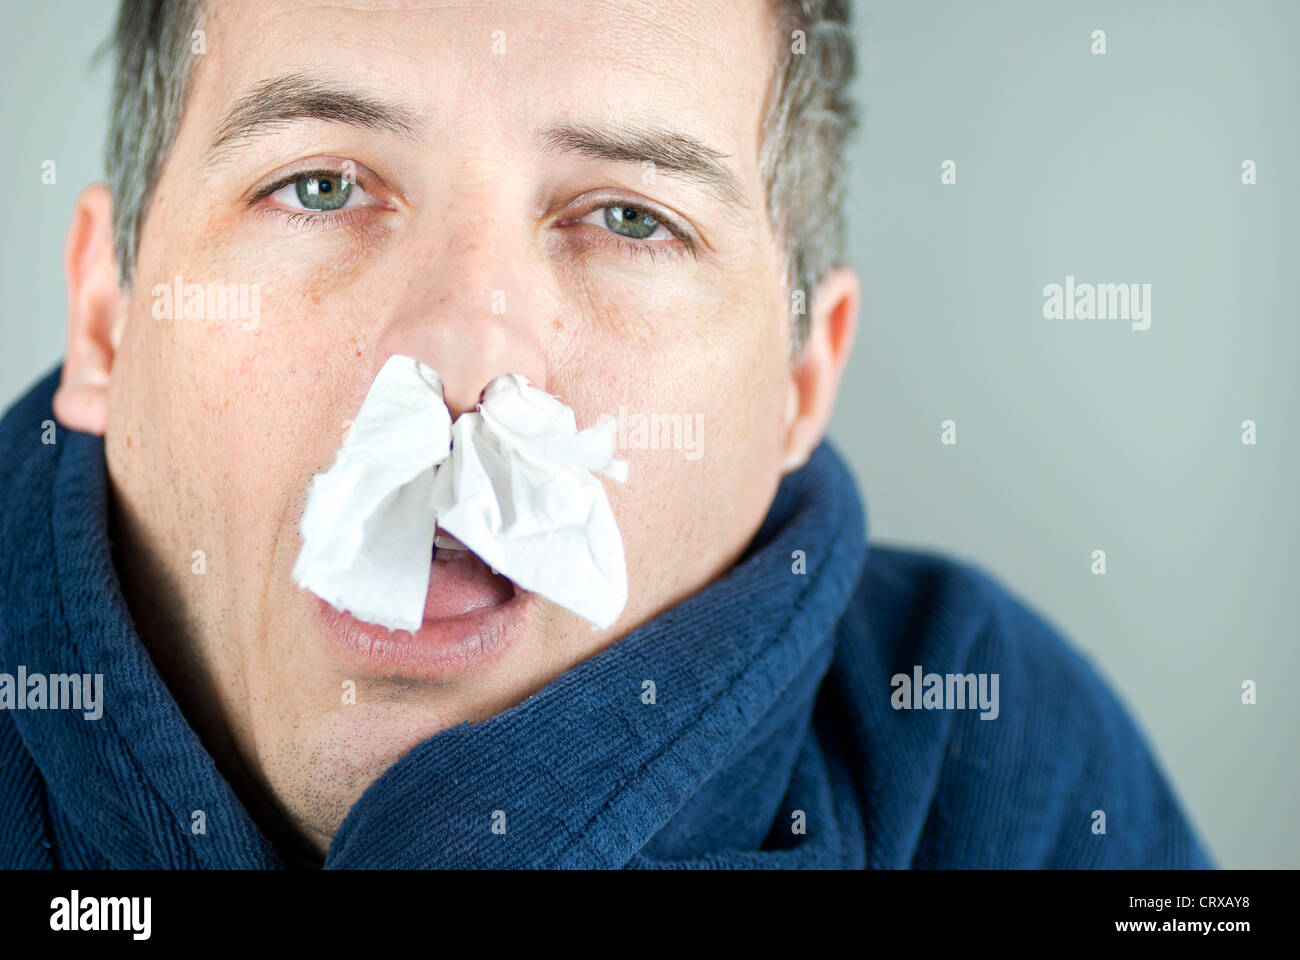 Close-up of a man with tissue in his nose. Stock Photo